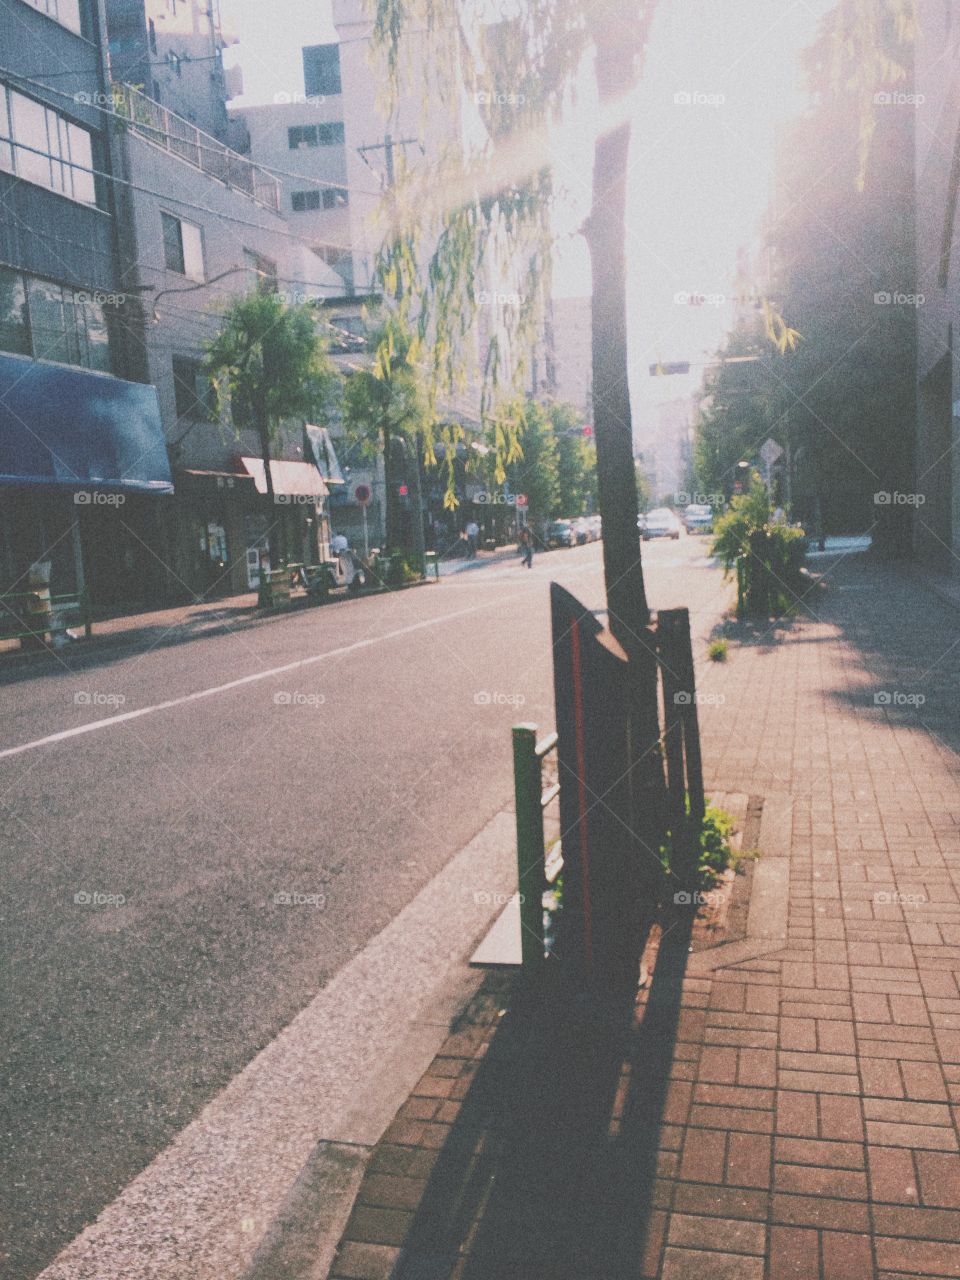 Tokyo glow. A Tokyo street in the morning light